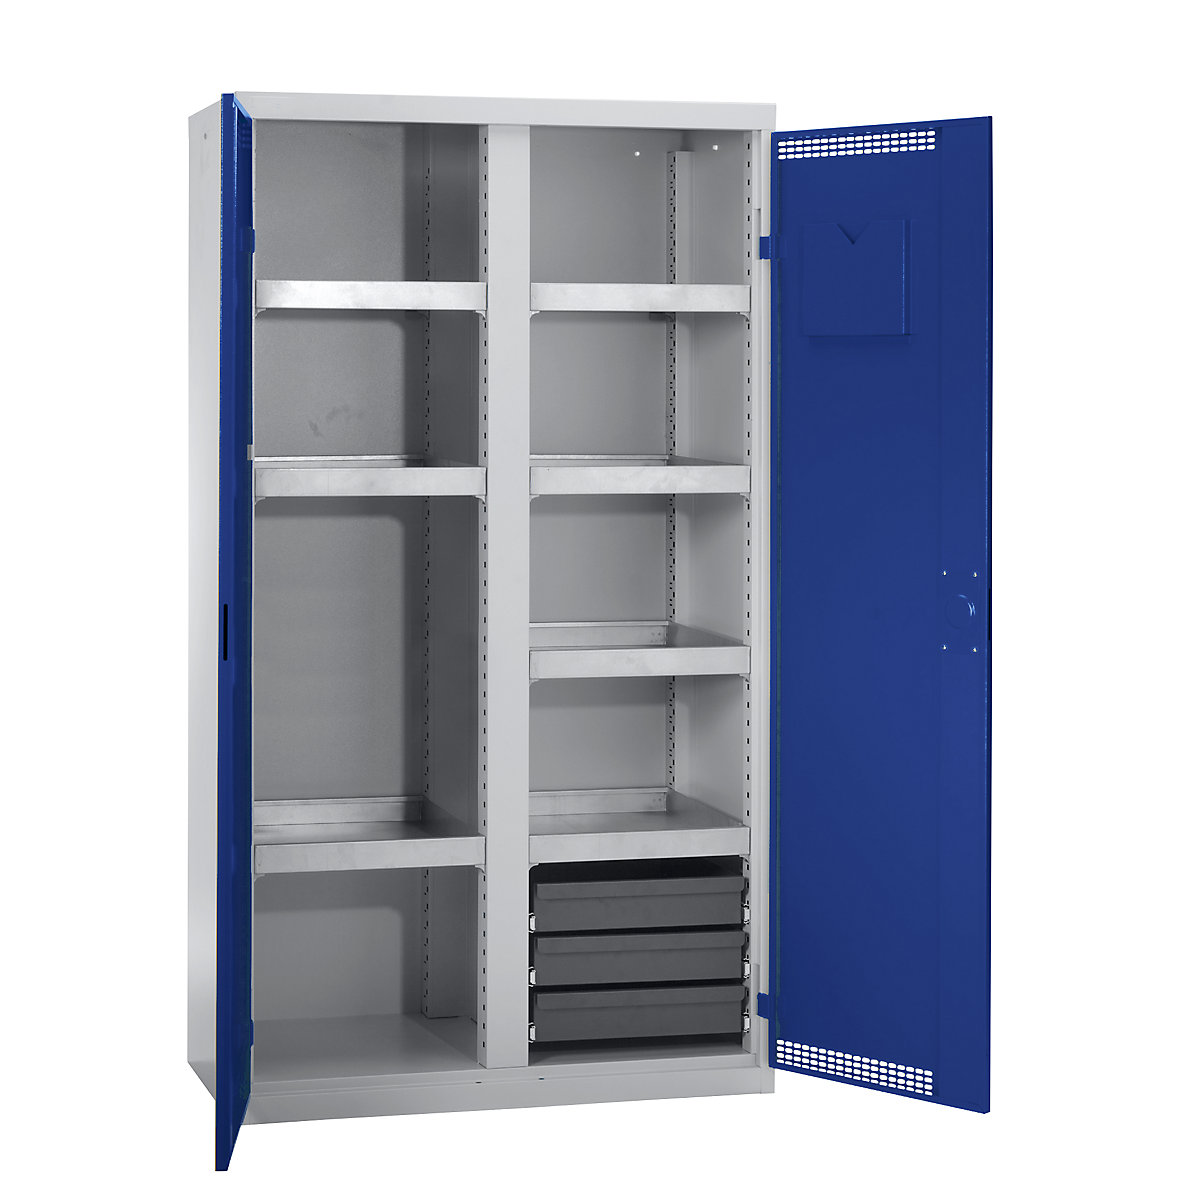 Environmental cupboard with door perforations, HxWxD 1800 x 1000 x 500 mm, 7 tray shelves, light grey / gentian blue-4